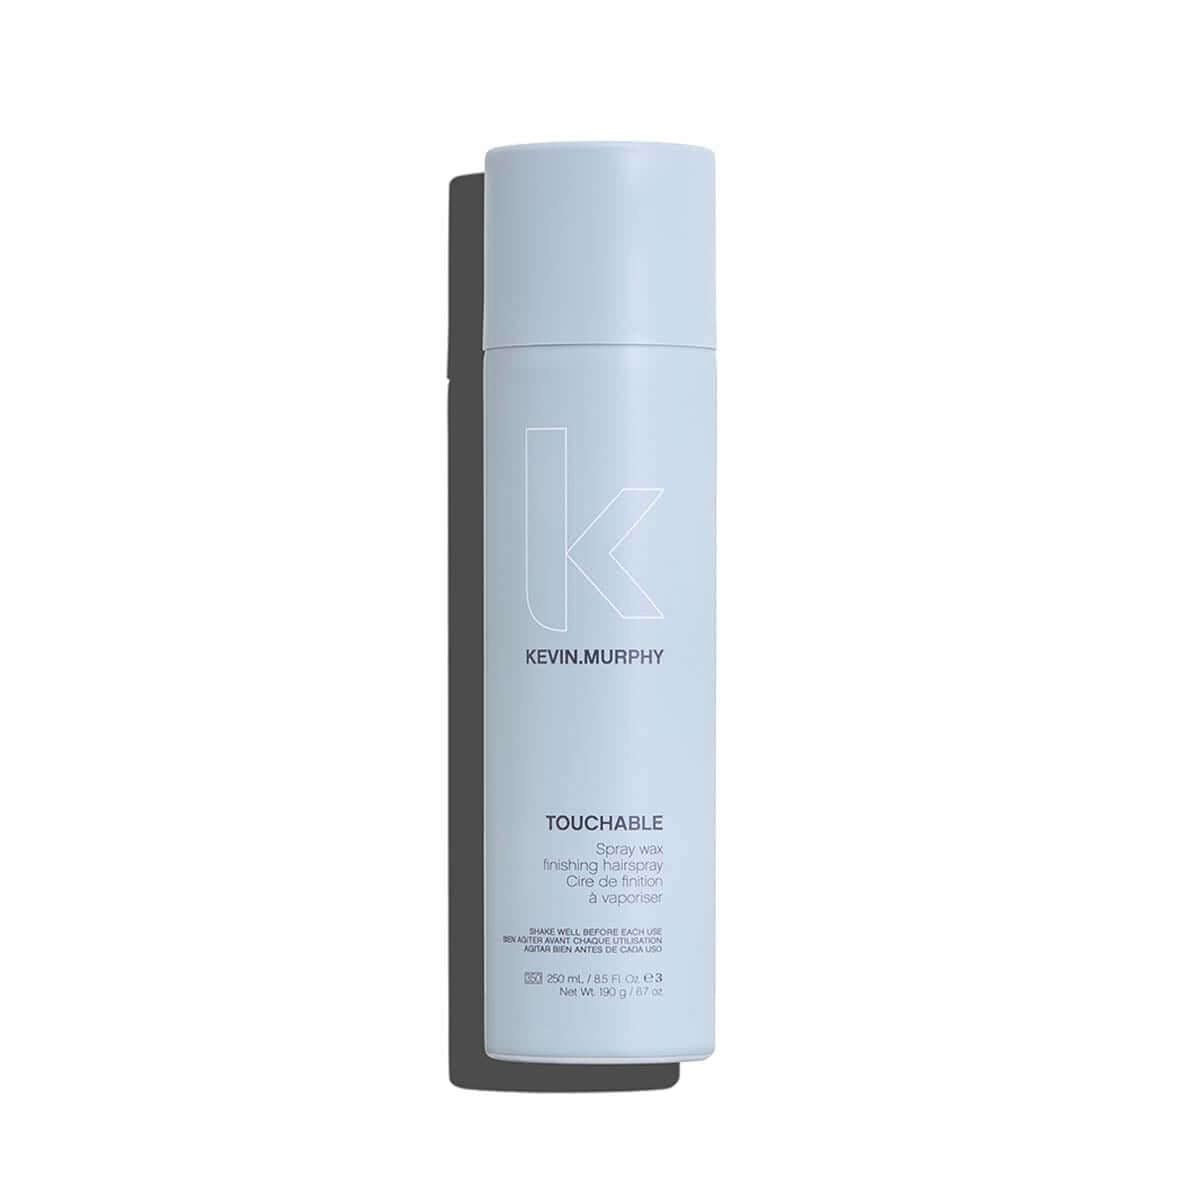 Kevin.Murphy Touchable 250mL